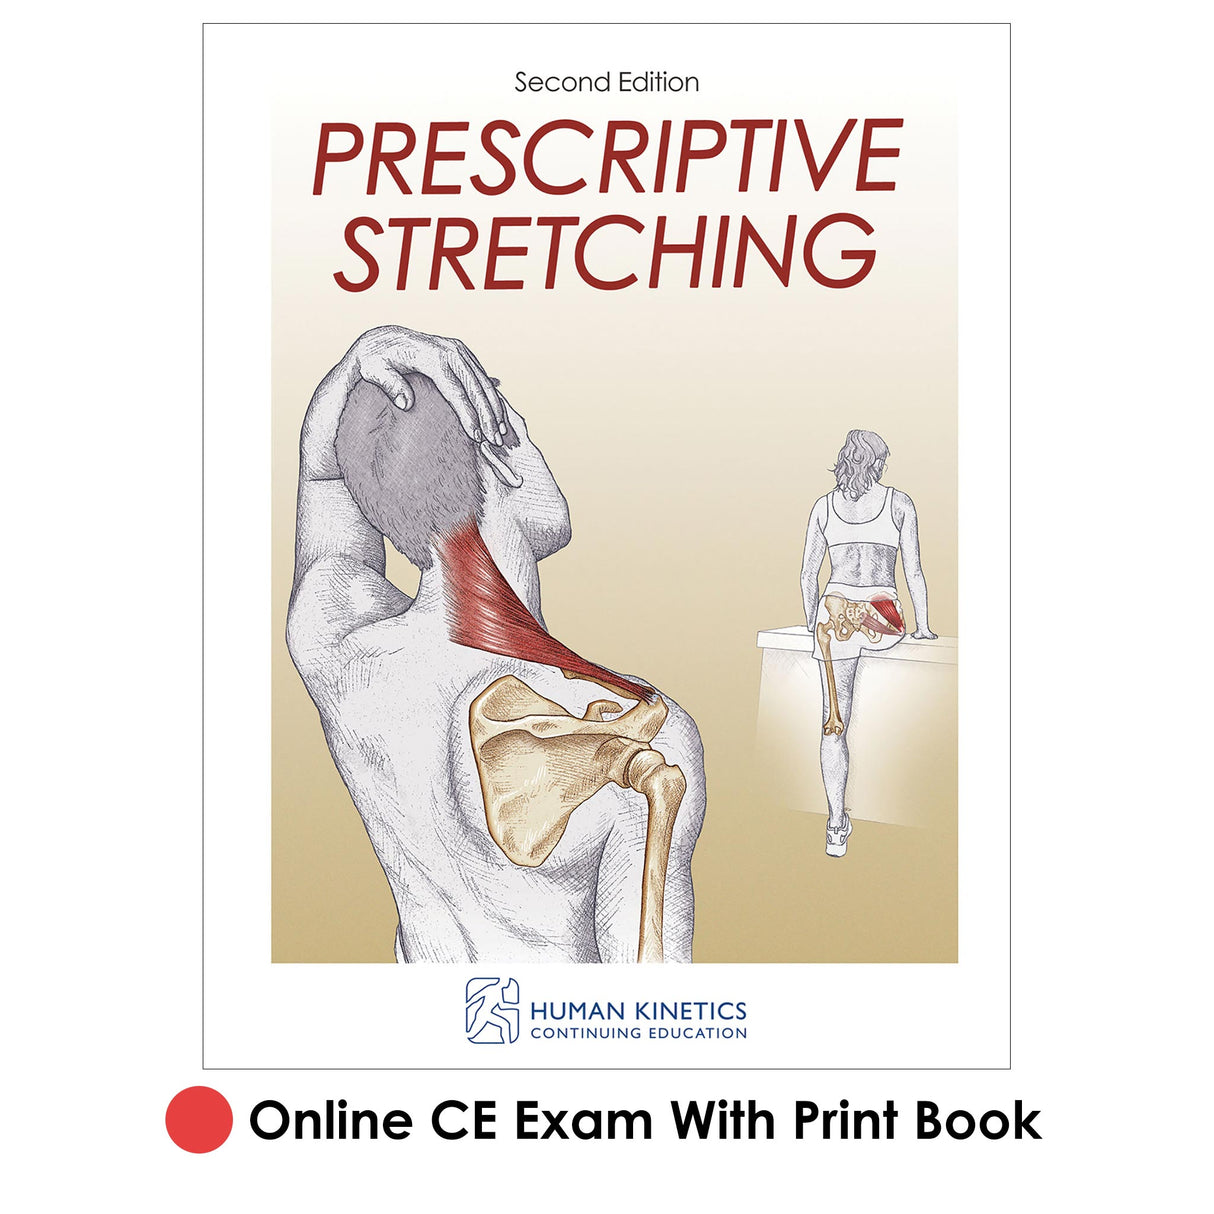 Prescriptive Stretching 2nd Edition Online CE Exam With Print Book